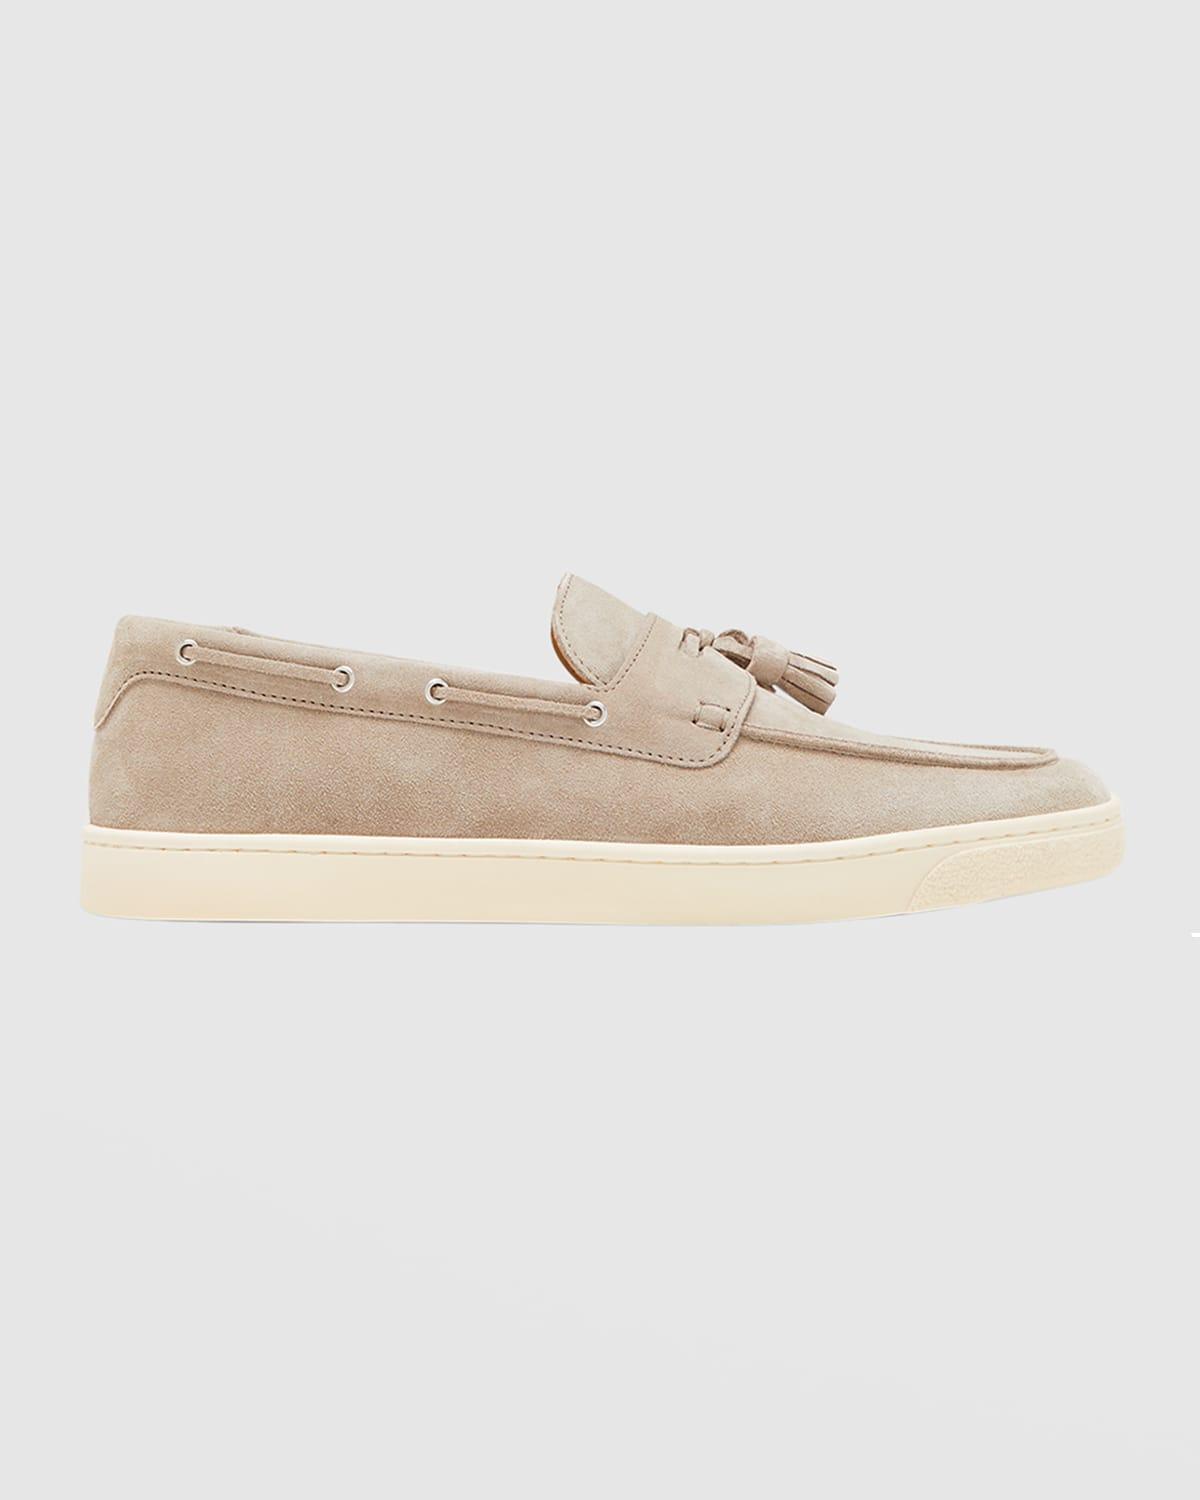 Brunello Cucinelli Suede Loafer Sneaker Product Image